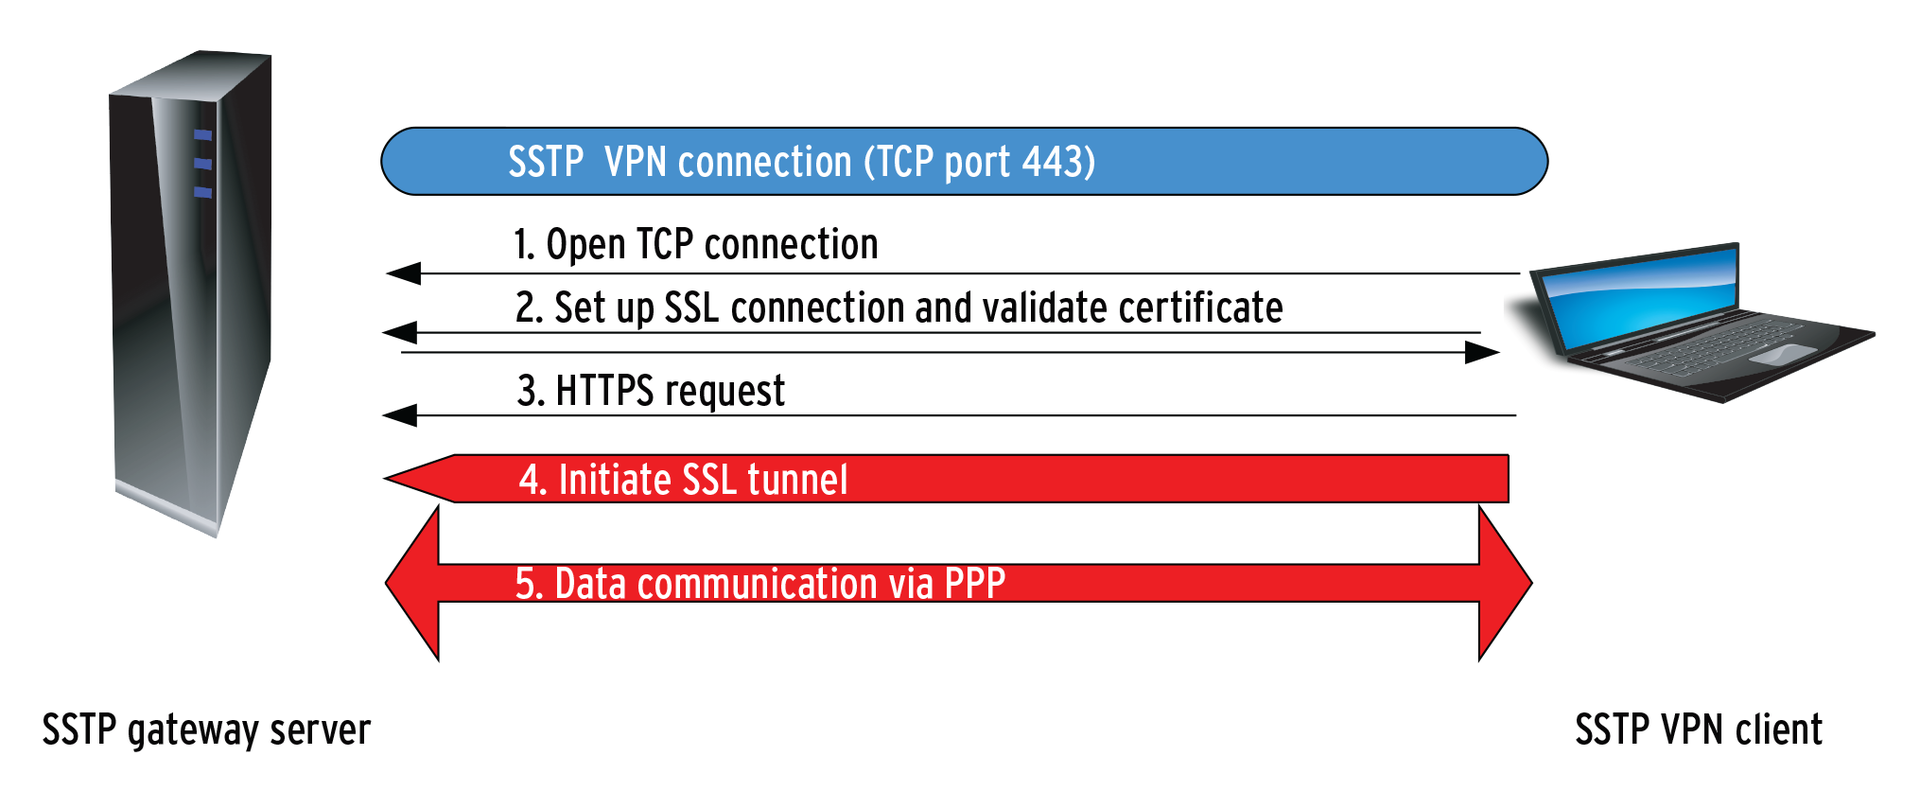 The SSTP handshake is not much different from a standard SSL handshake. In contrast to IPsec, SSTP sends PPP packets (not IP packets) through the tunnel. 